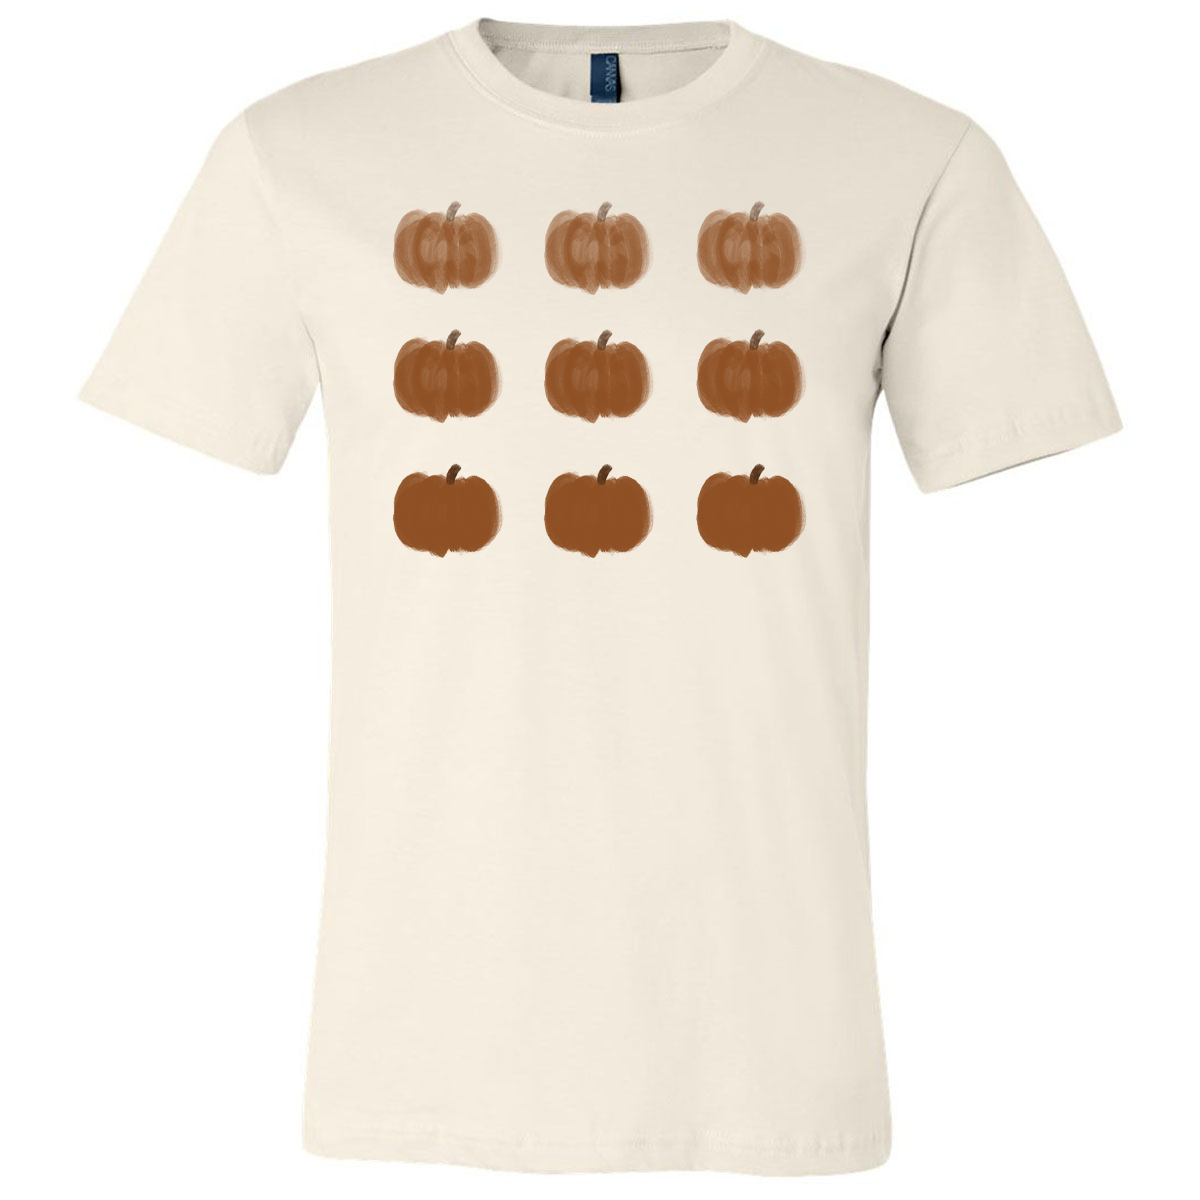 Nine Little Punkins Tee - Natural - Southern Grace Creations